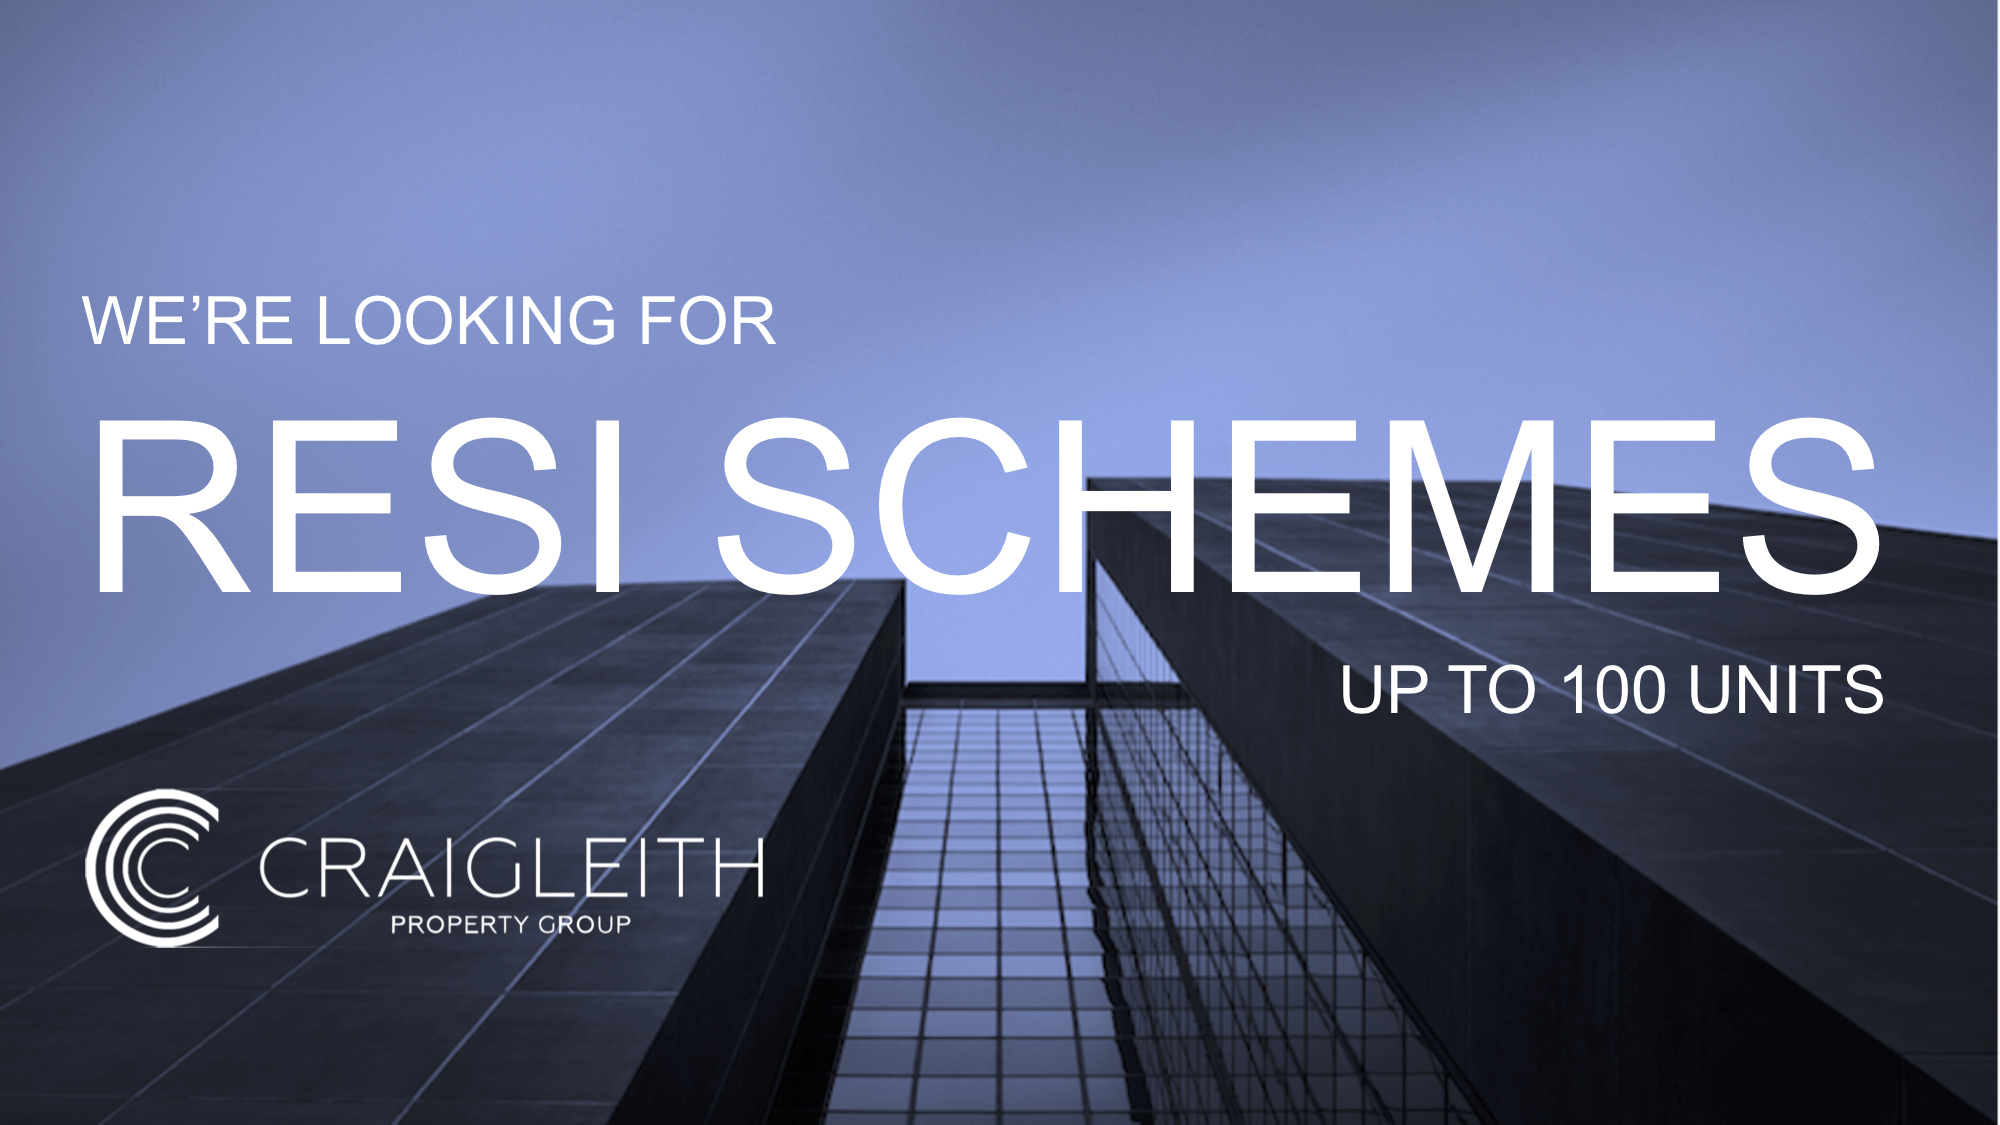 Resi schemes required - up to 100 units.